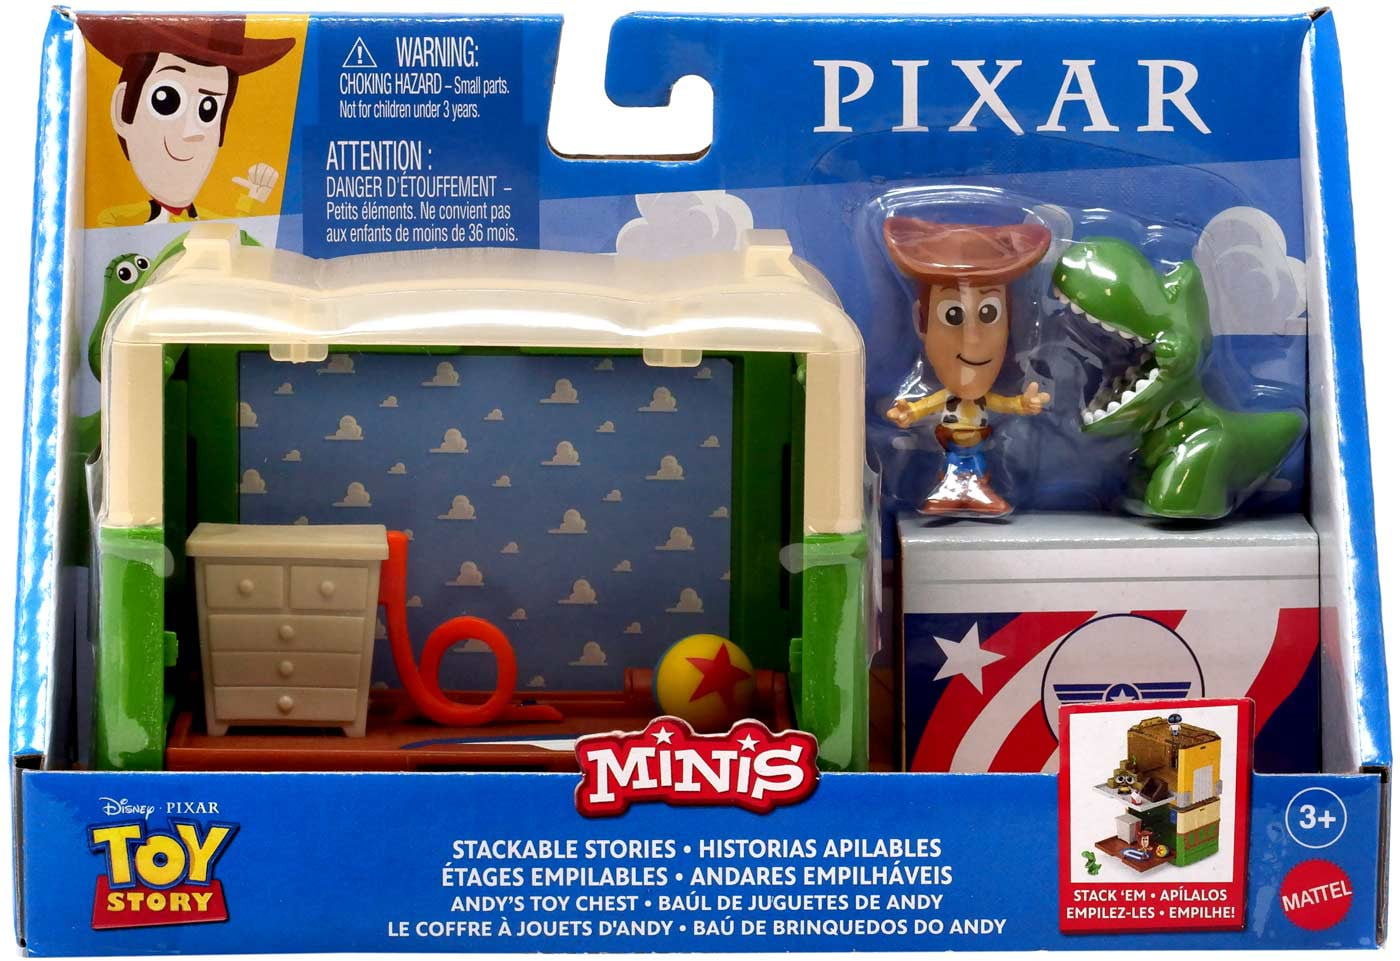 Disney PIXAR Toy Story 4 Creativity Play Set at Tractor Supply Co.